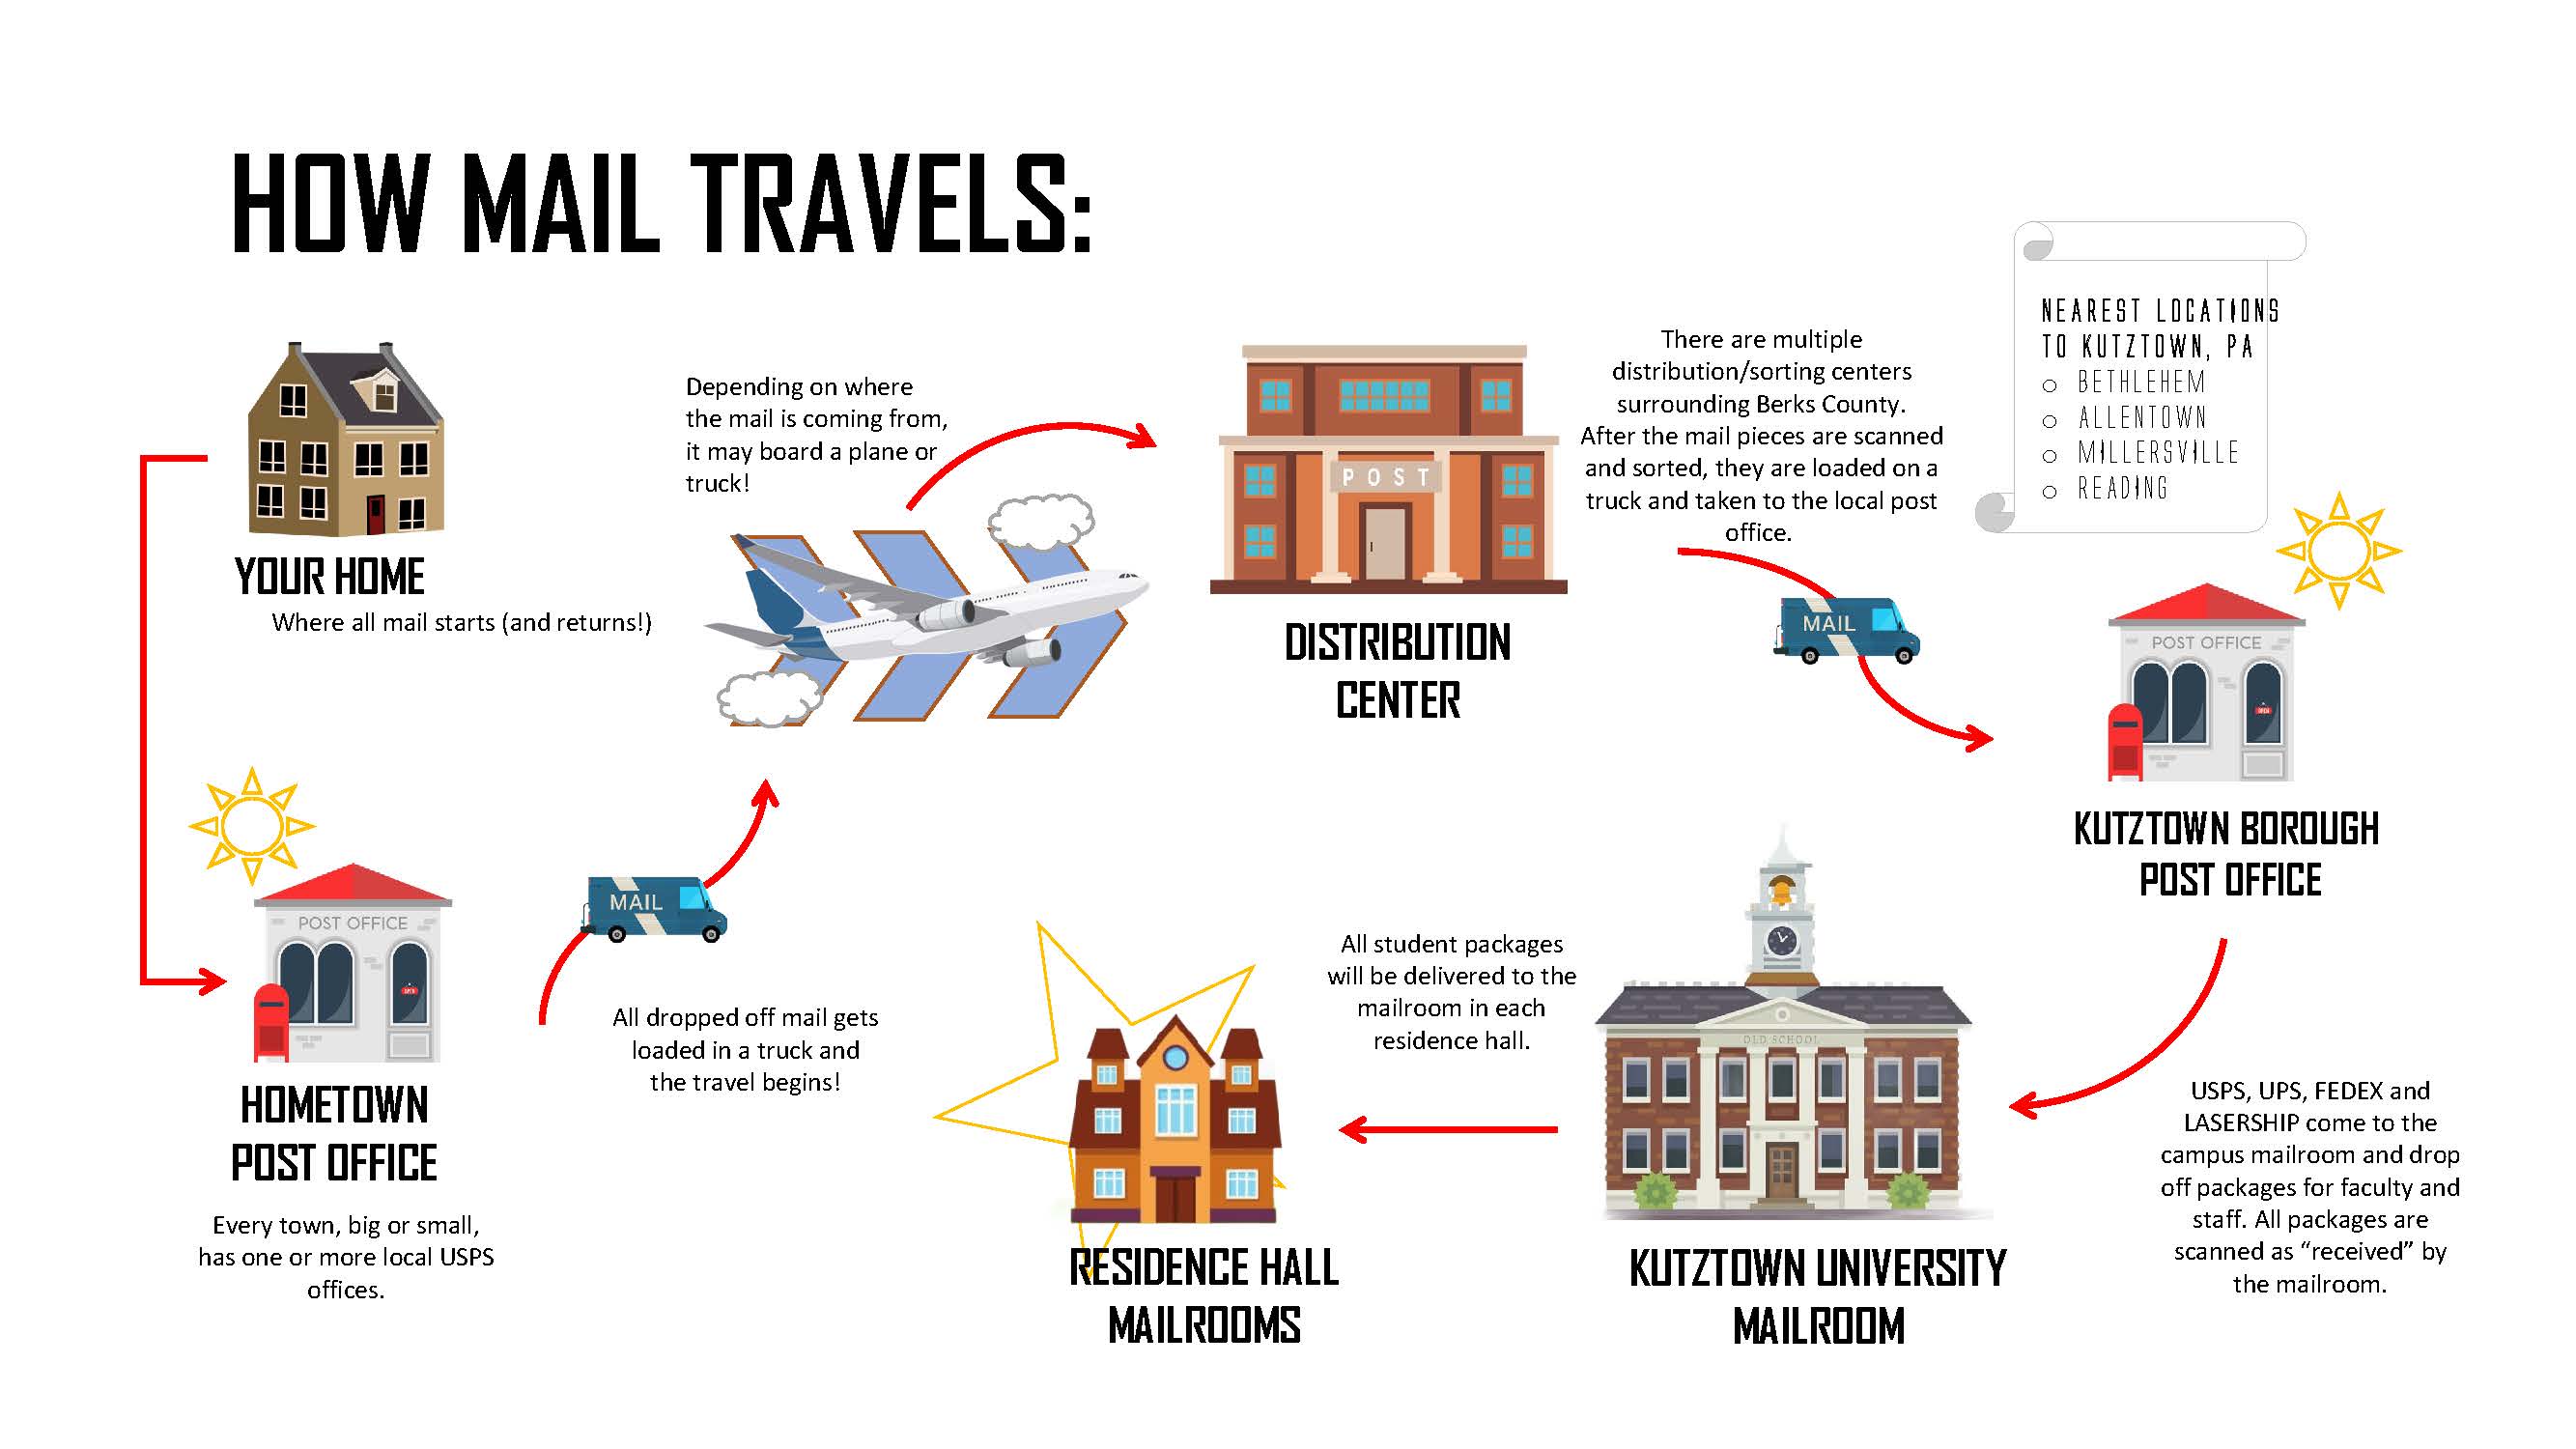 Flow chart displaying how mail travels from your home through distribution centers and to the residence halls